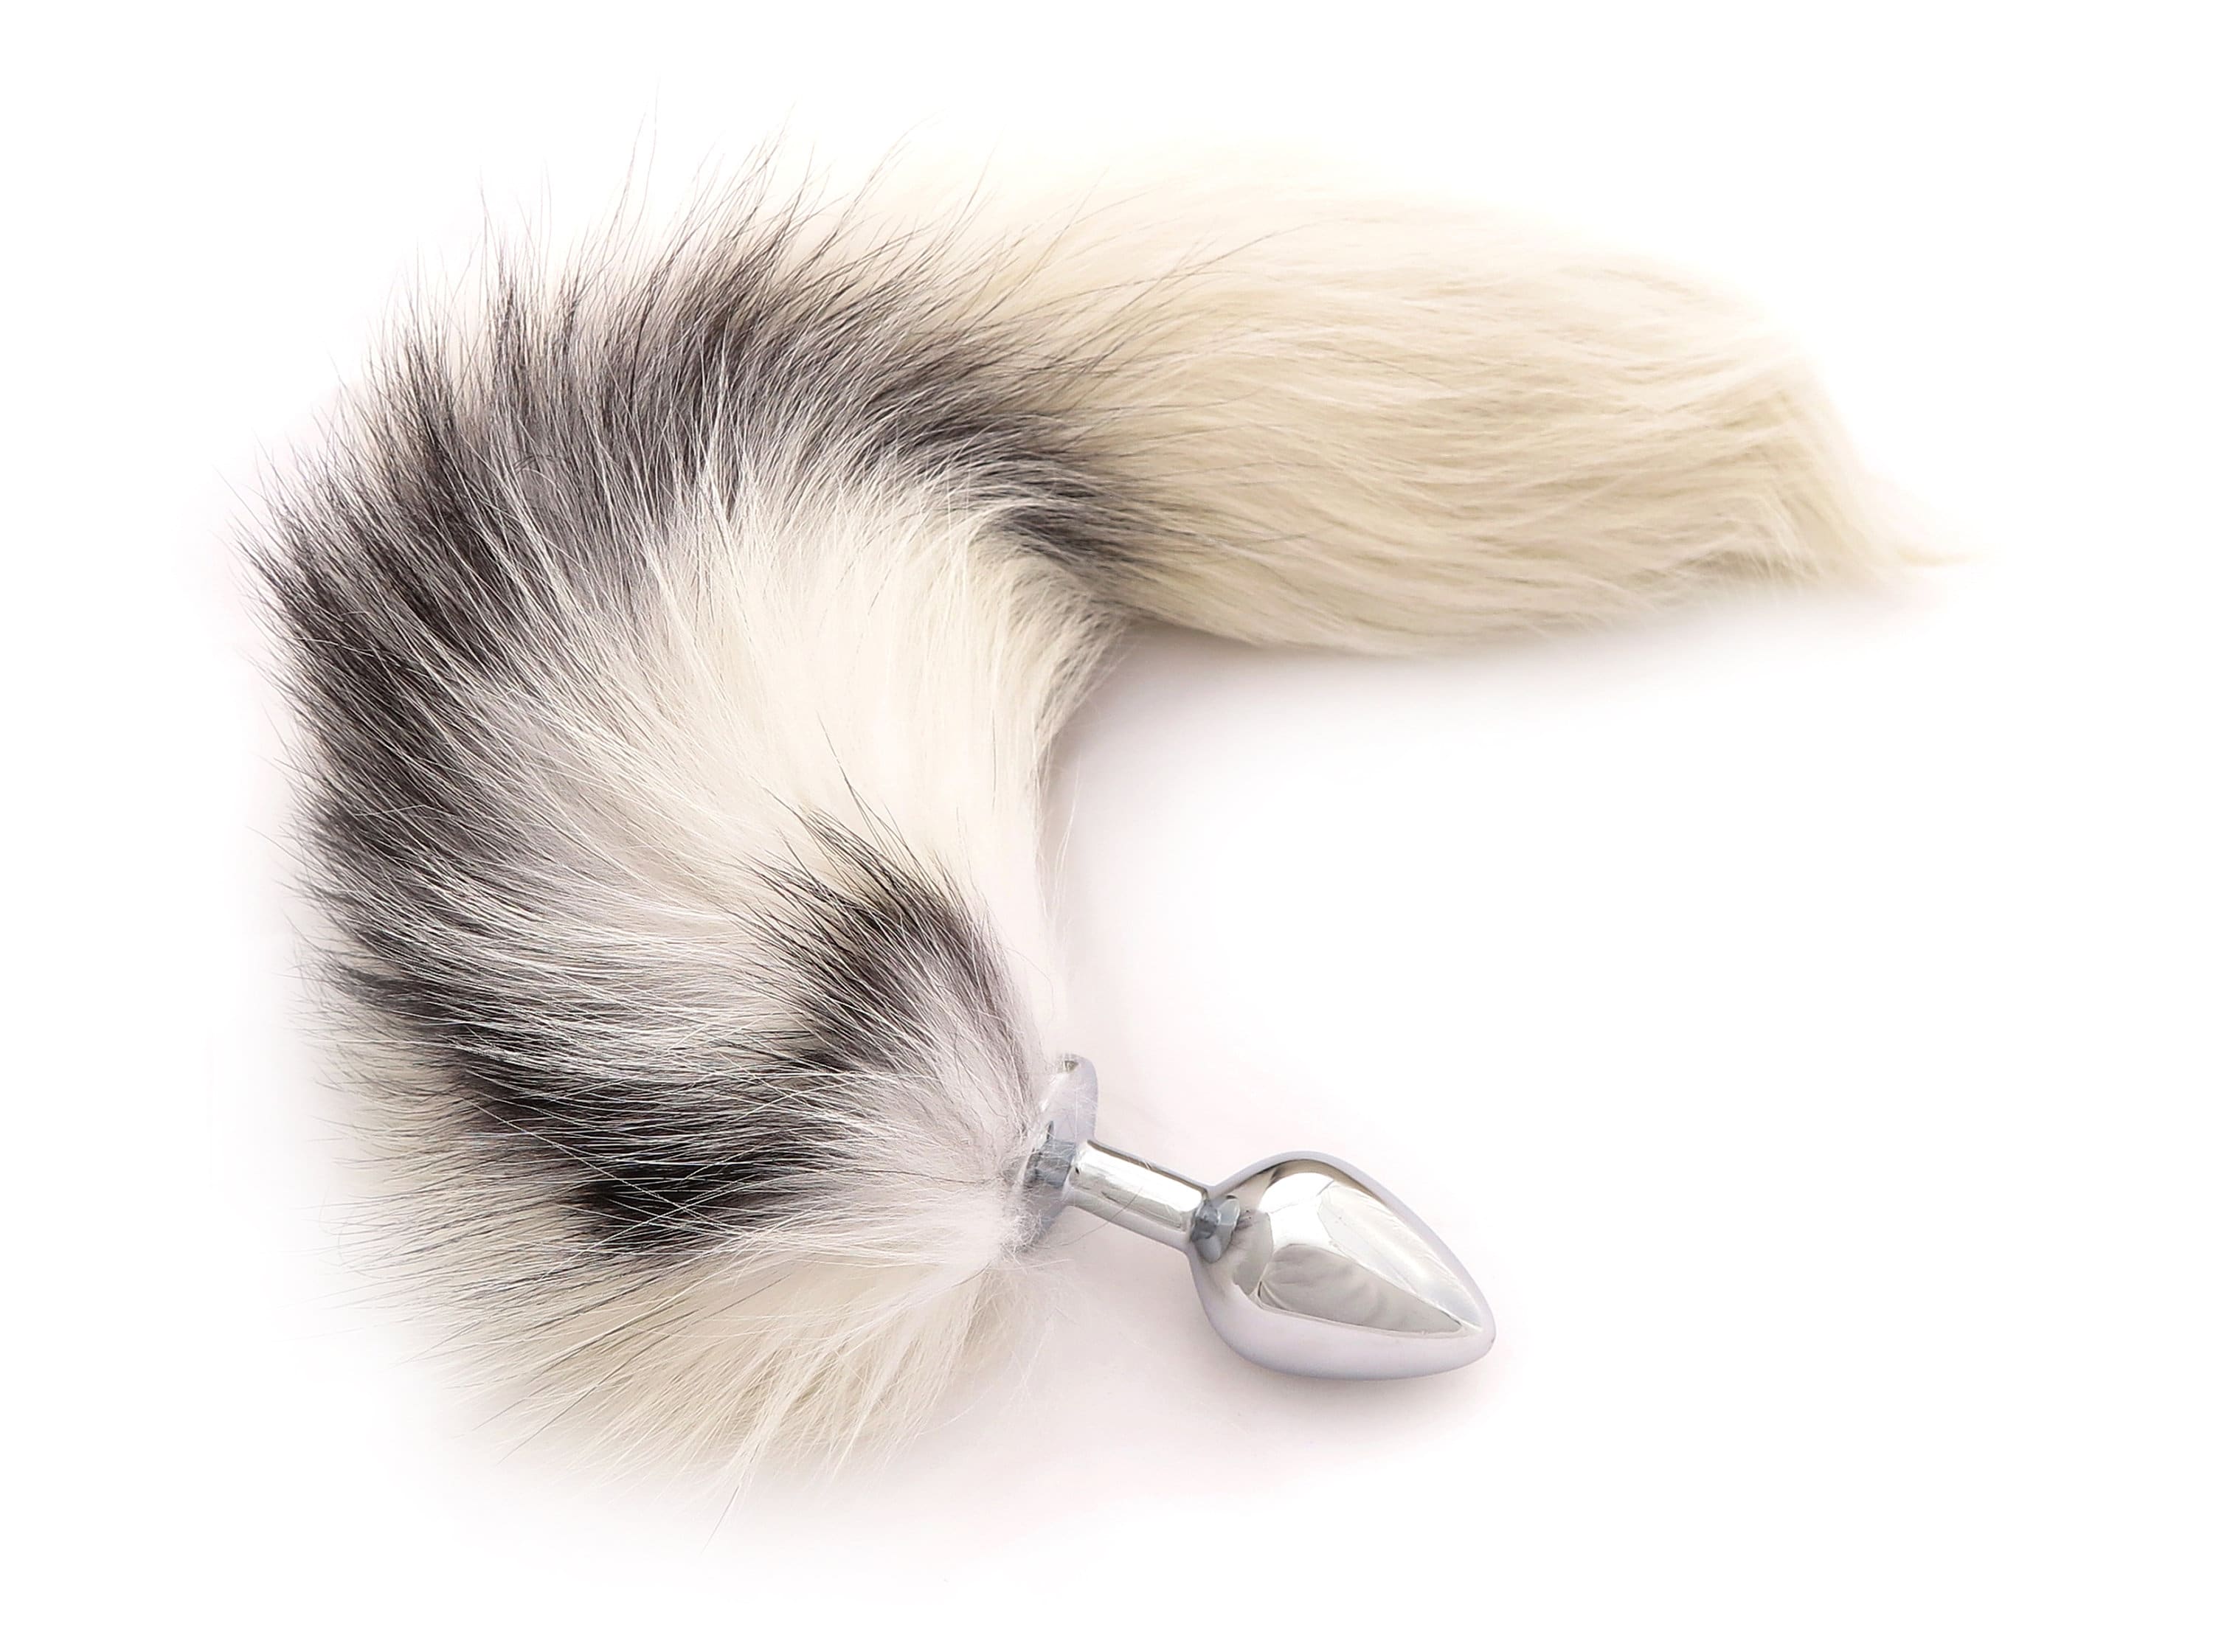 Wolf Tail Butt Plug With White And Grey Fur Cosplay Tail Or Etsy